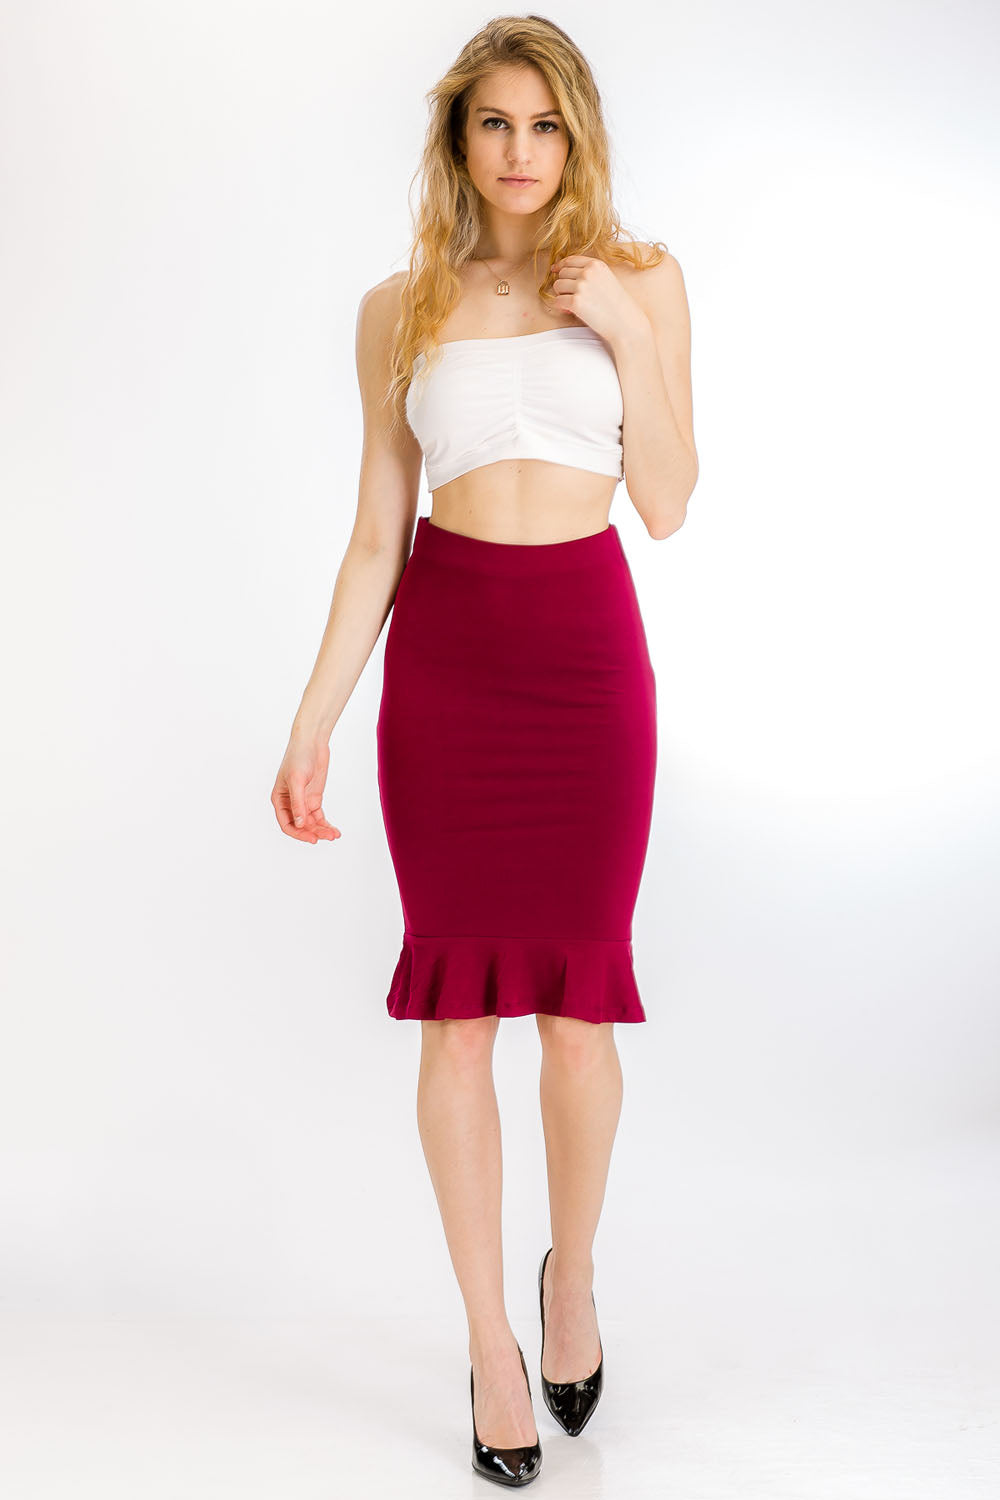 [$1/Piece] Solid Ruffled Pencil Skirt